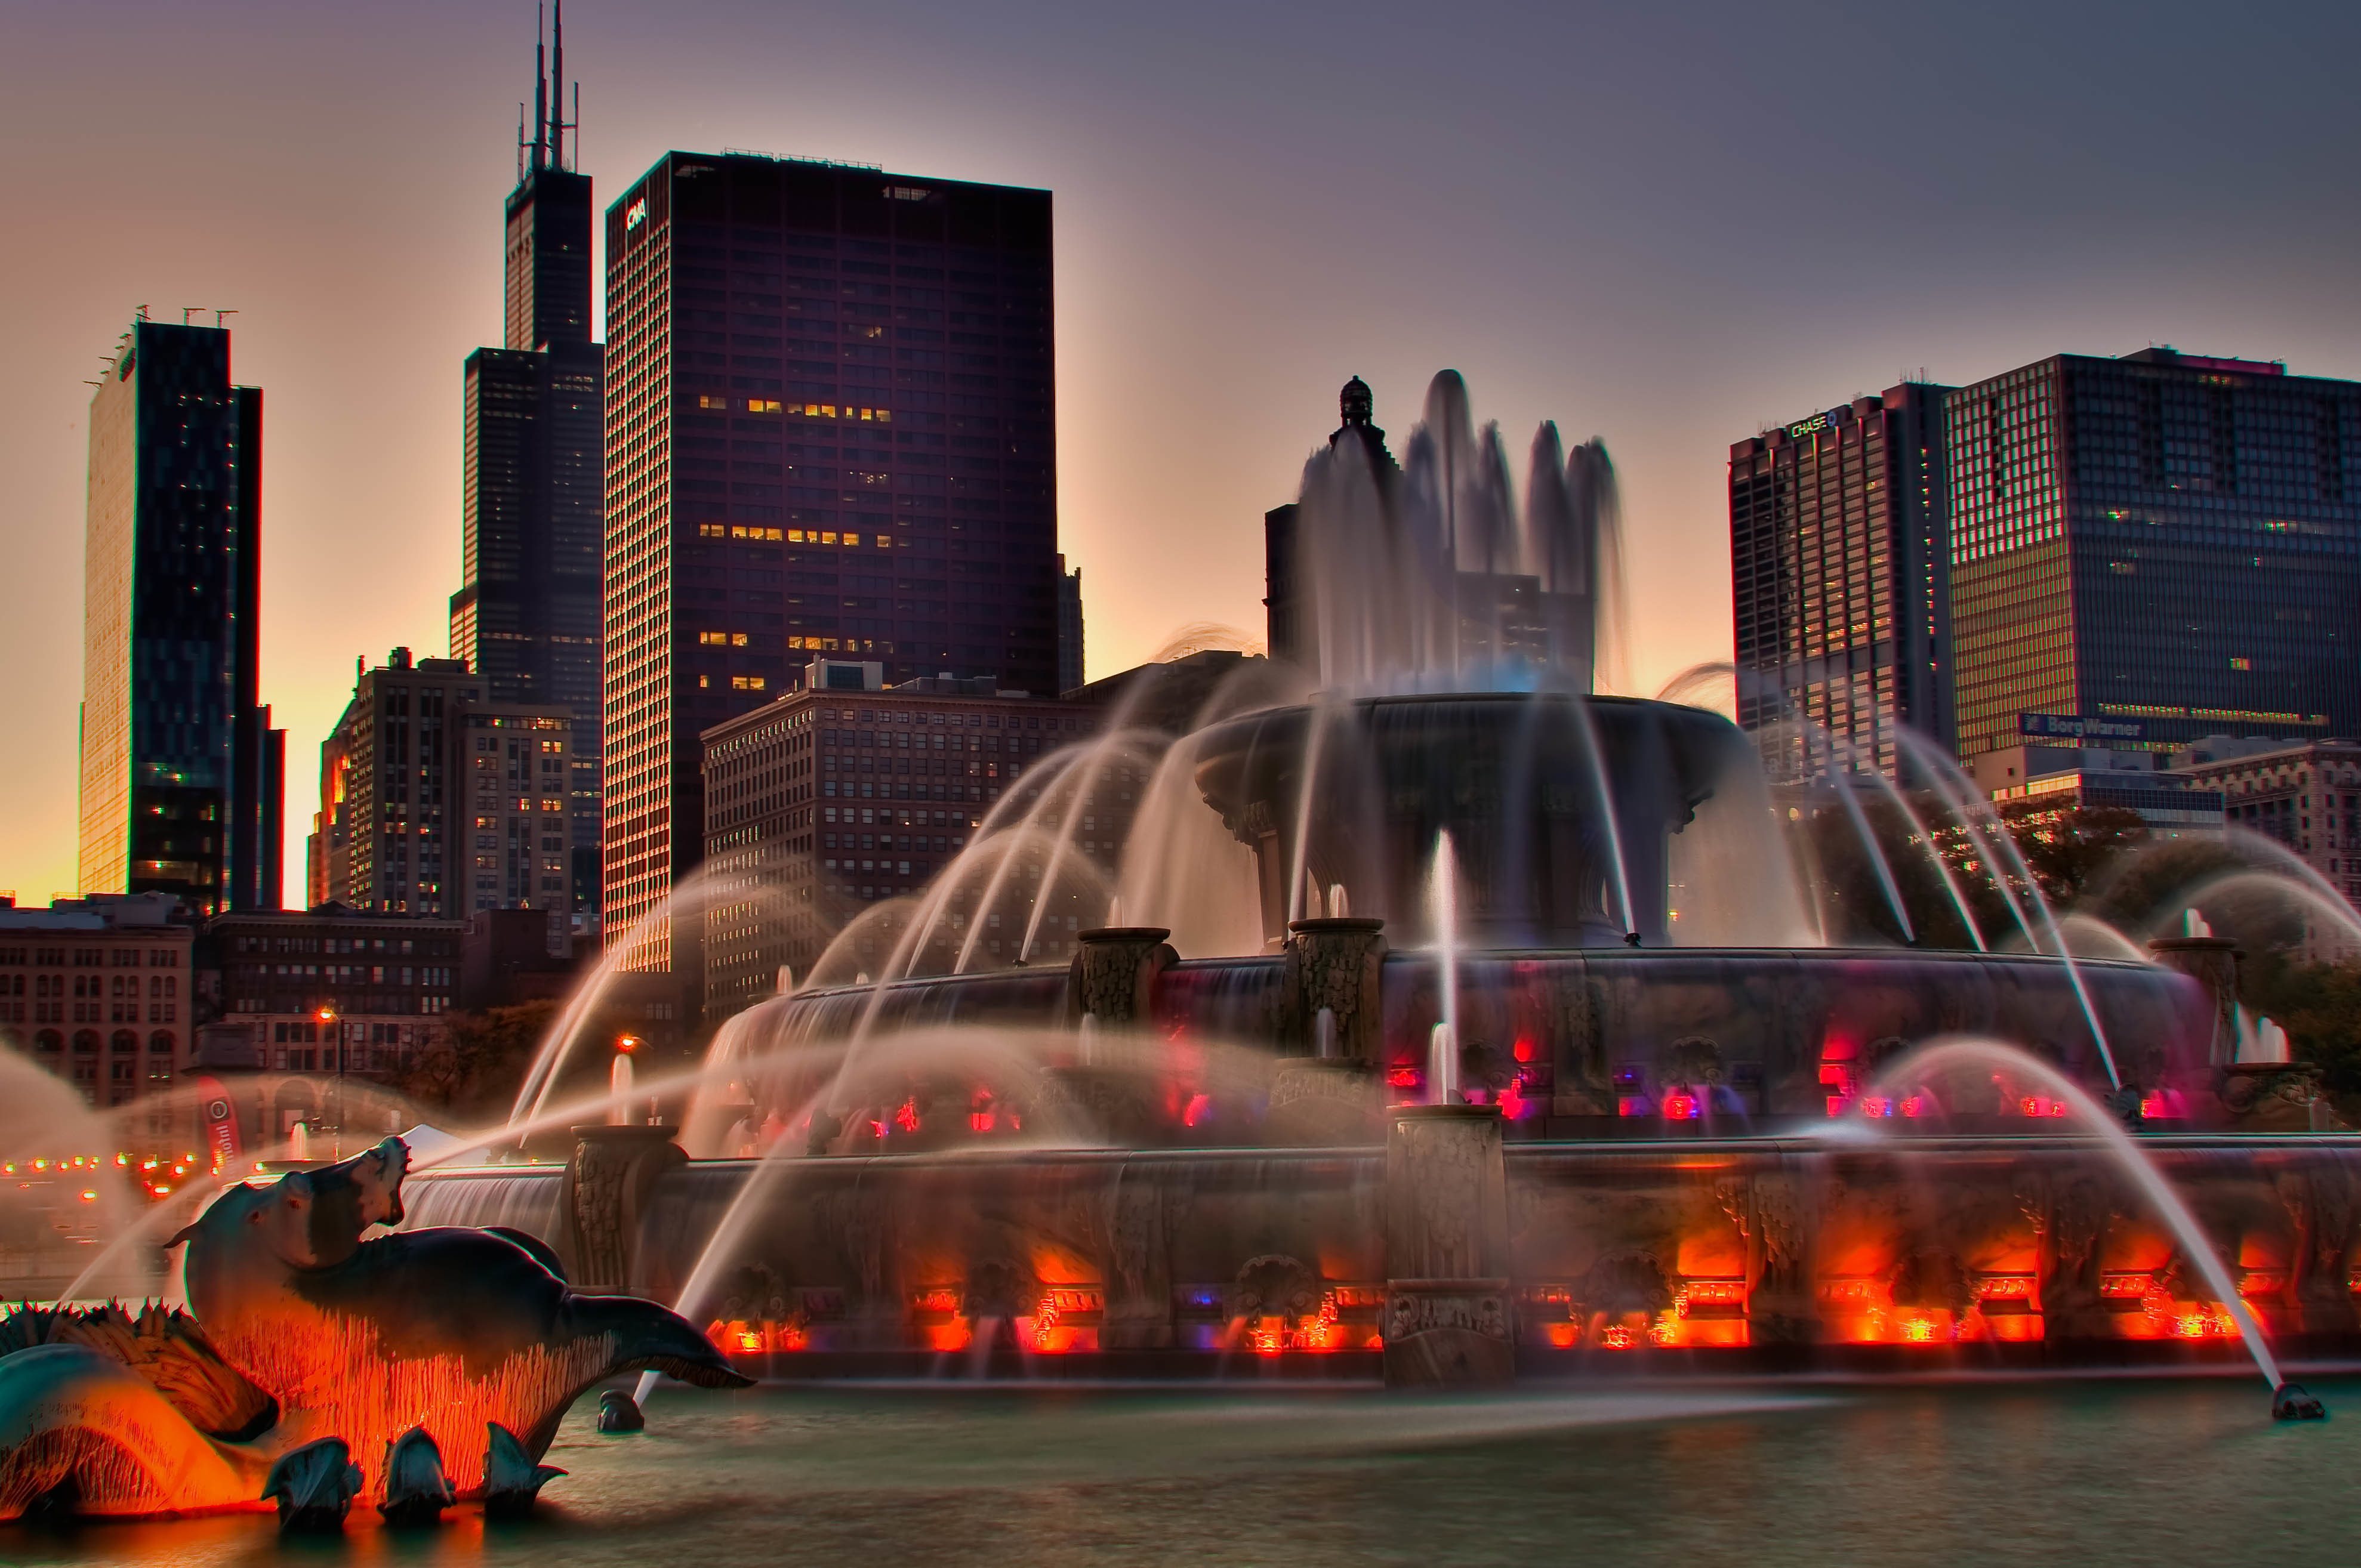 man made, fountain, chicago, evening, illinois, light download HD wallpaper